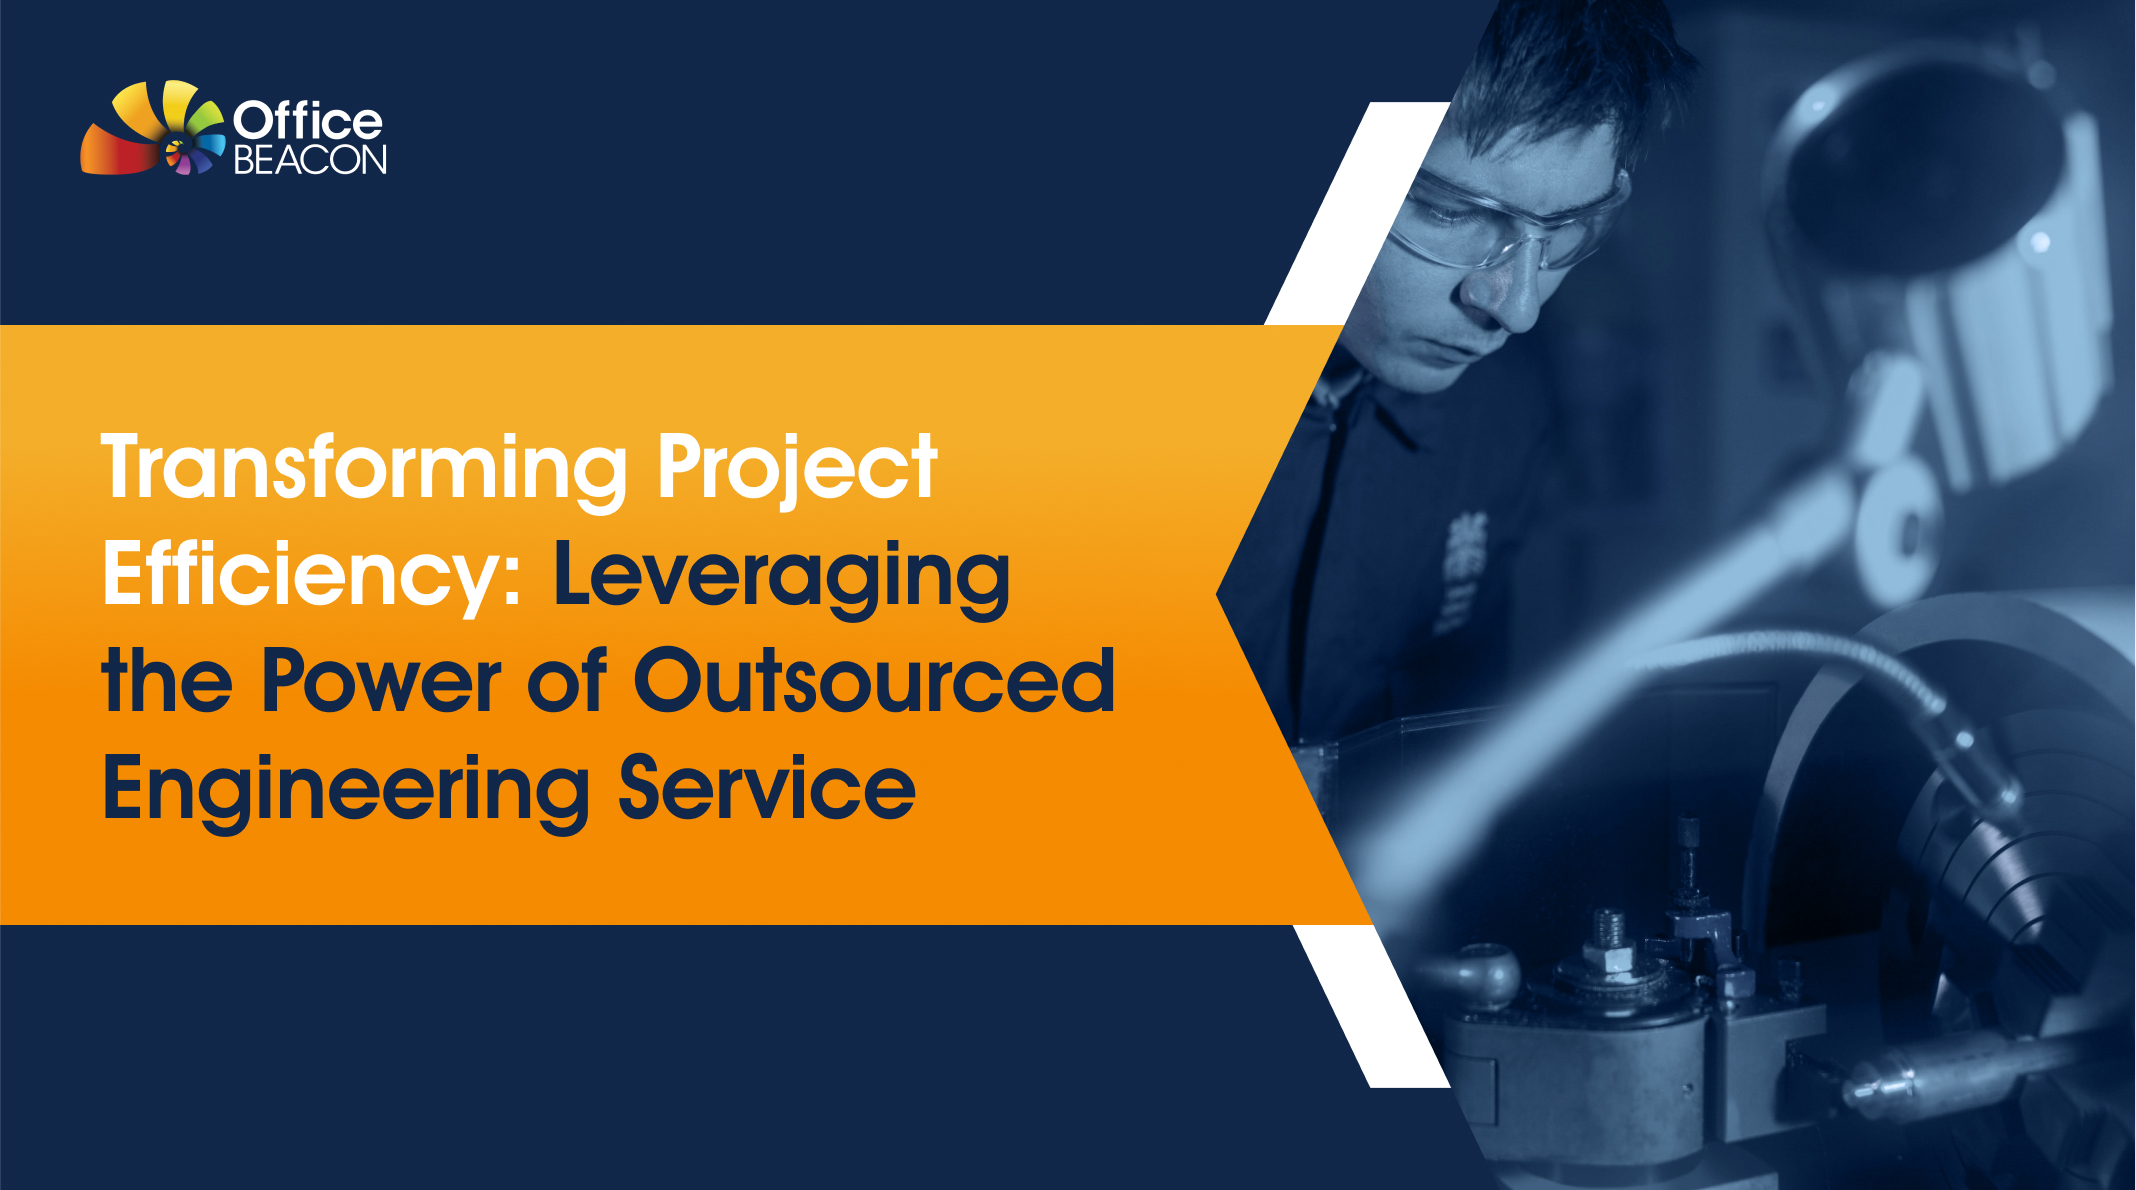 Transforming Project Efficiency: Leveraging the Power of Outsourced Engineering Service